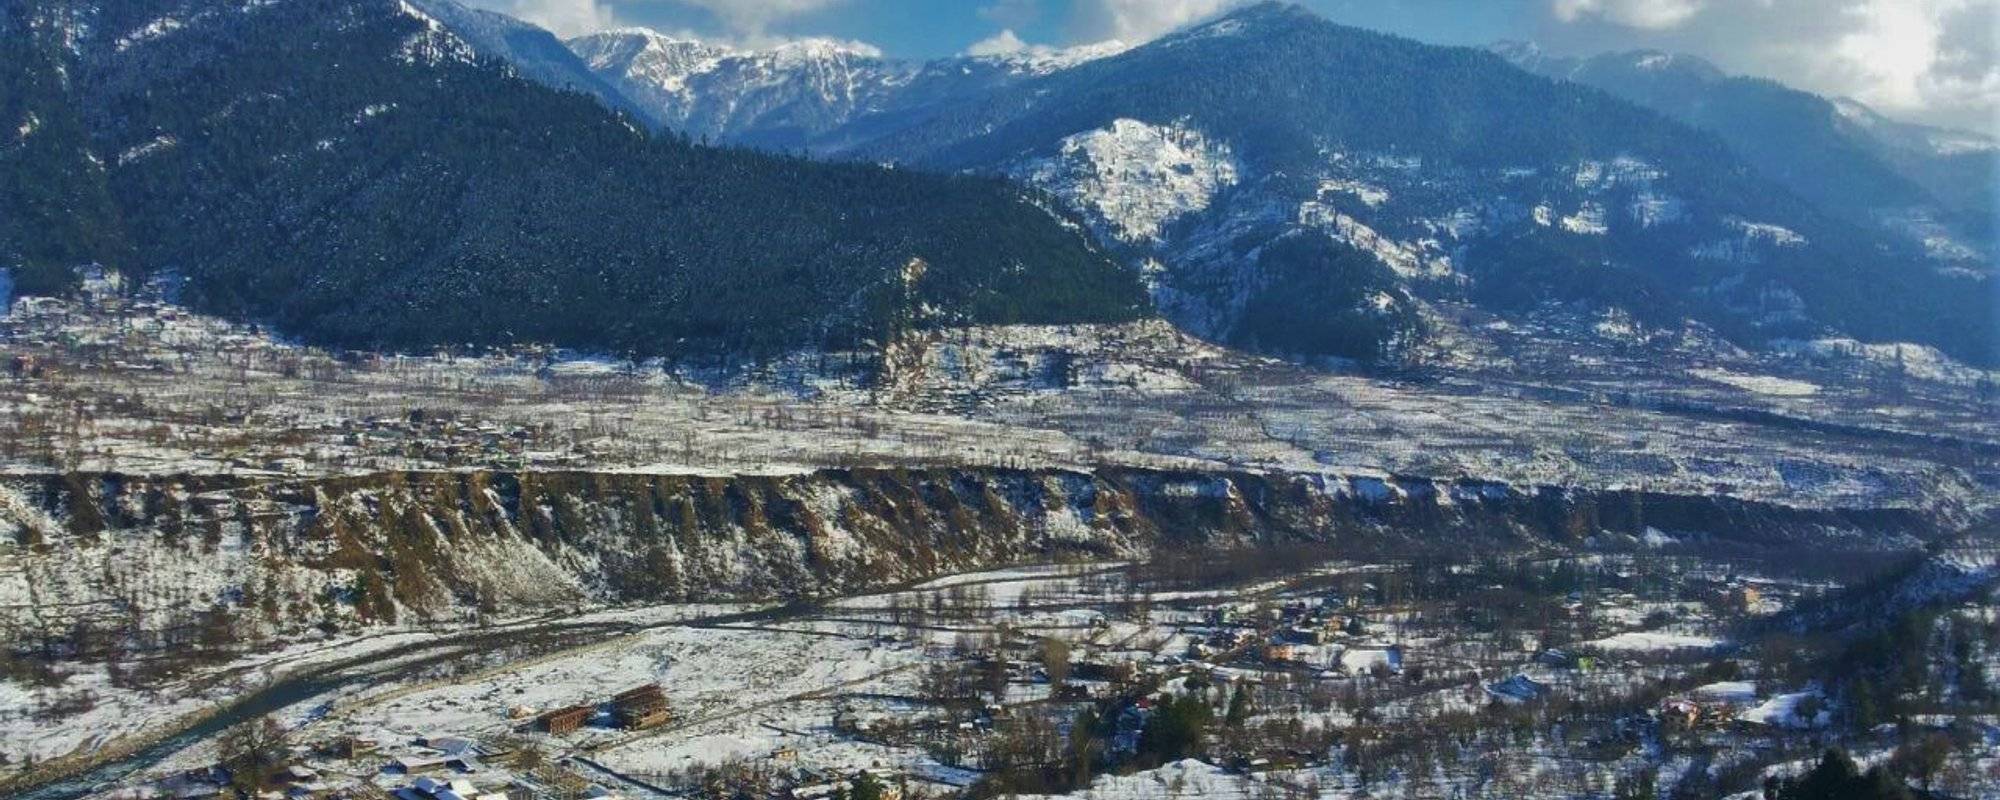 "A SNOW PARADISE", MANALI, TOWN IN HIMALAYAS. (EYE PLEASING PHOTOGRAPHS WITH PERSONAL EXPERIENCE)